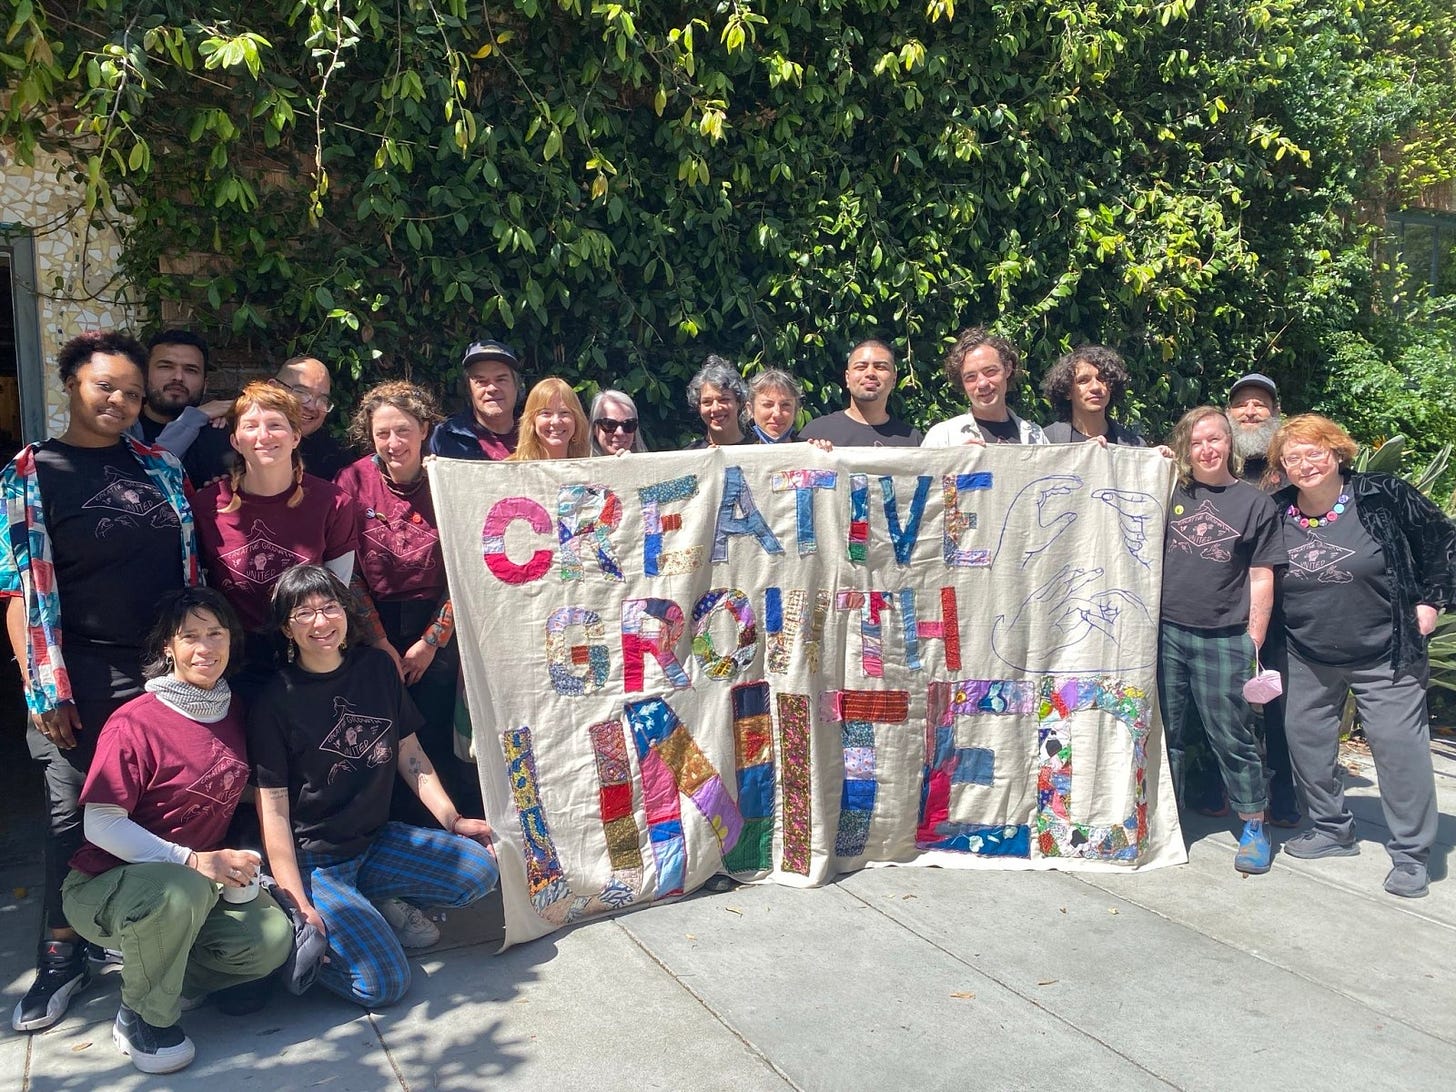 A photo of 18 people outside on a sunny day holding a large banner with quilted letters that say CREATIVE GROWTH UNITED.